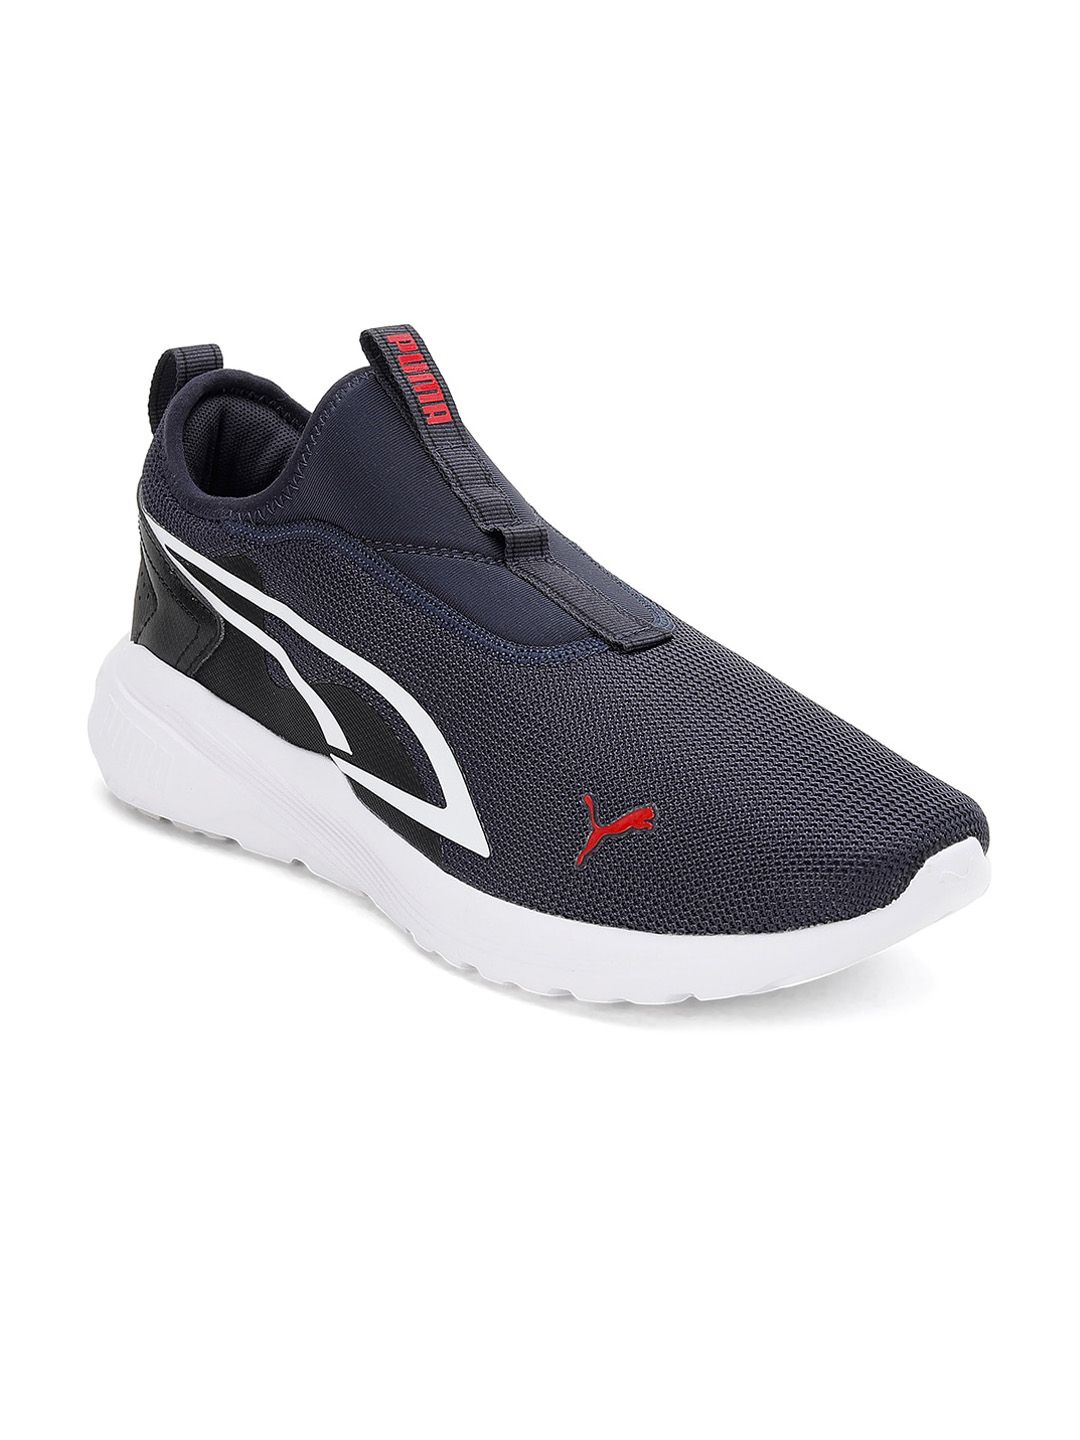 Puma Unisex Blue All-Day Active Slip-On Sneakers Colourblocked High-Top Slip-On Sneakers Price in India